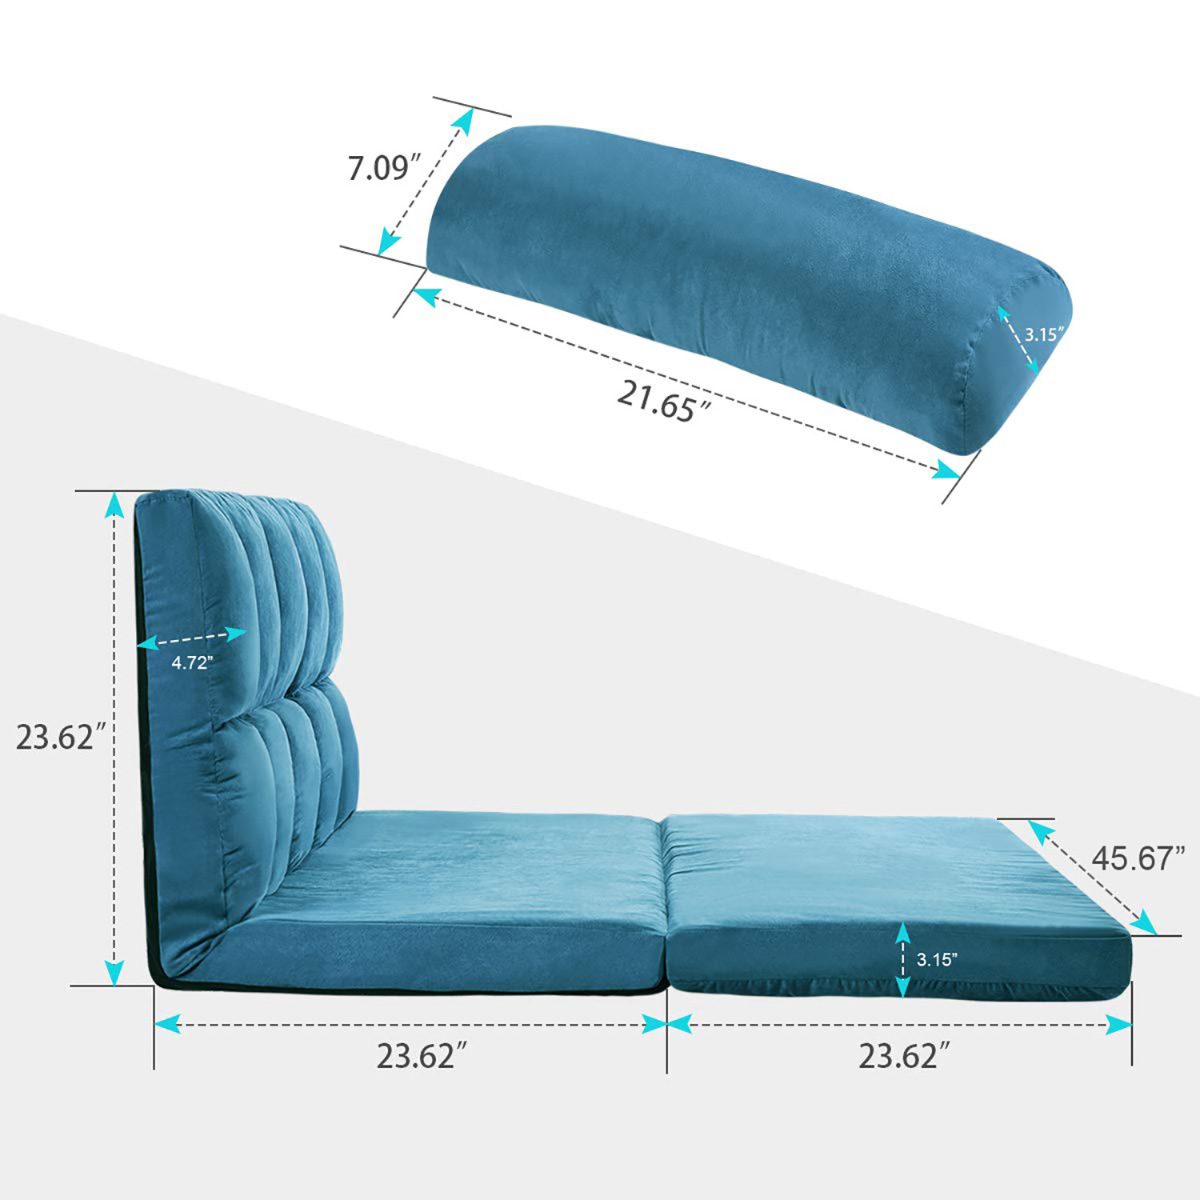 Double Chaise Lounge Sofa With Two Pillows